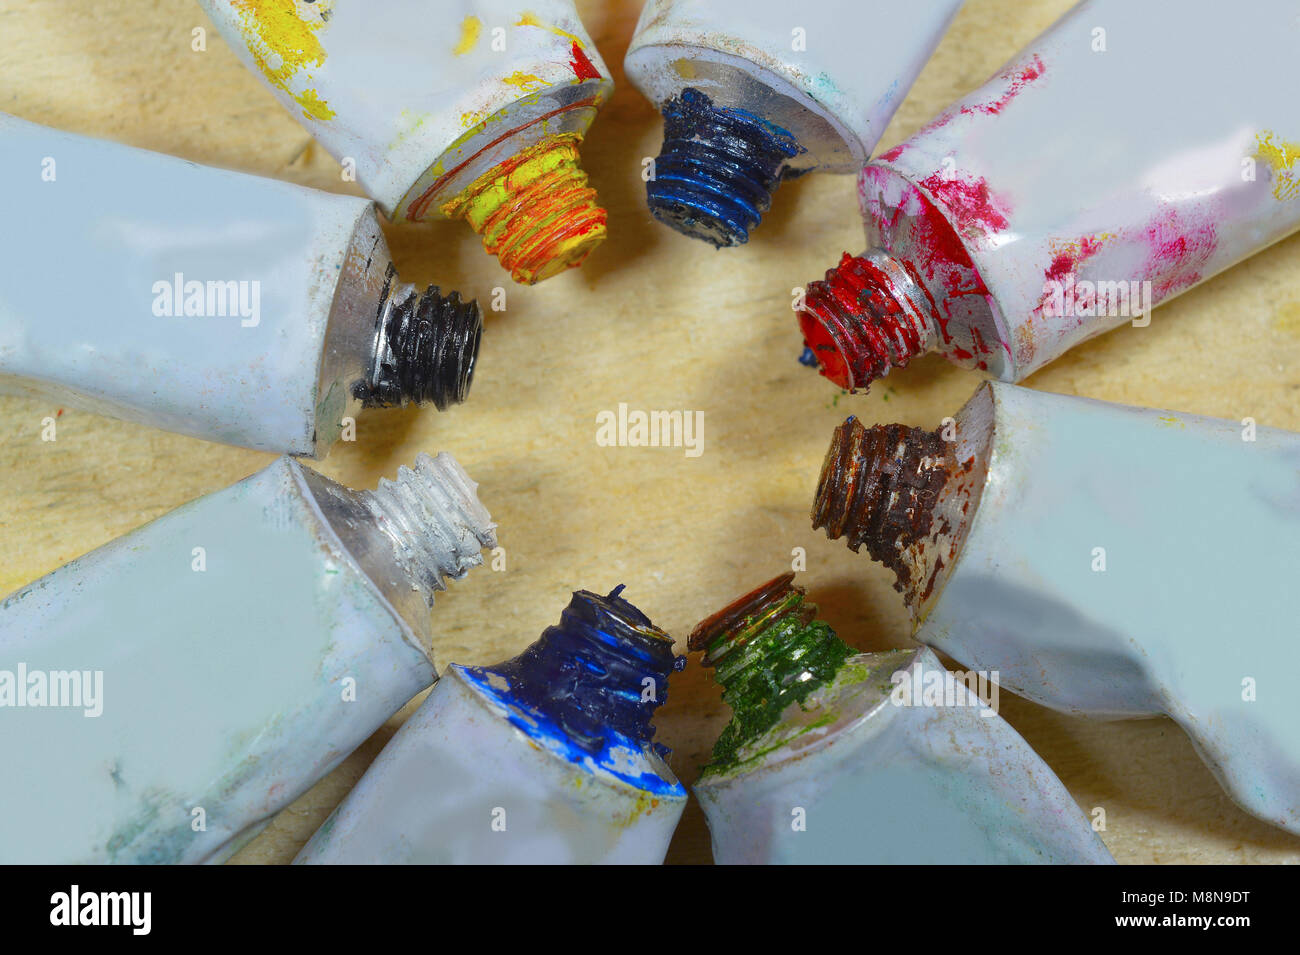 Close view of tubes of colorful paint in a circular form isolated on wooden background Stock Photo